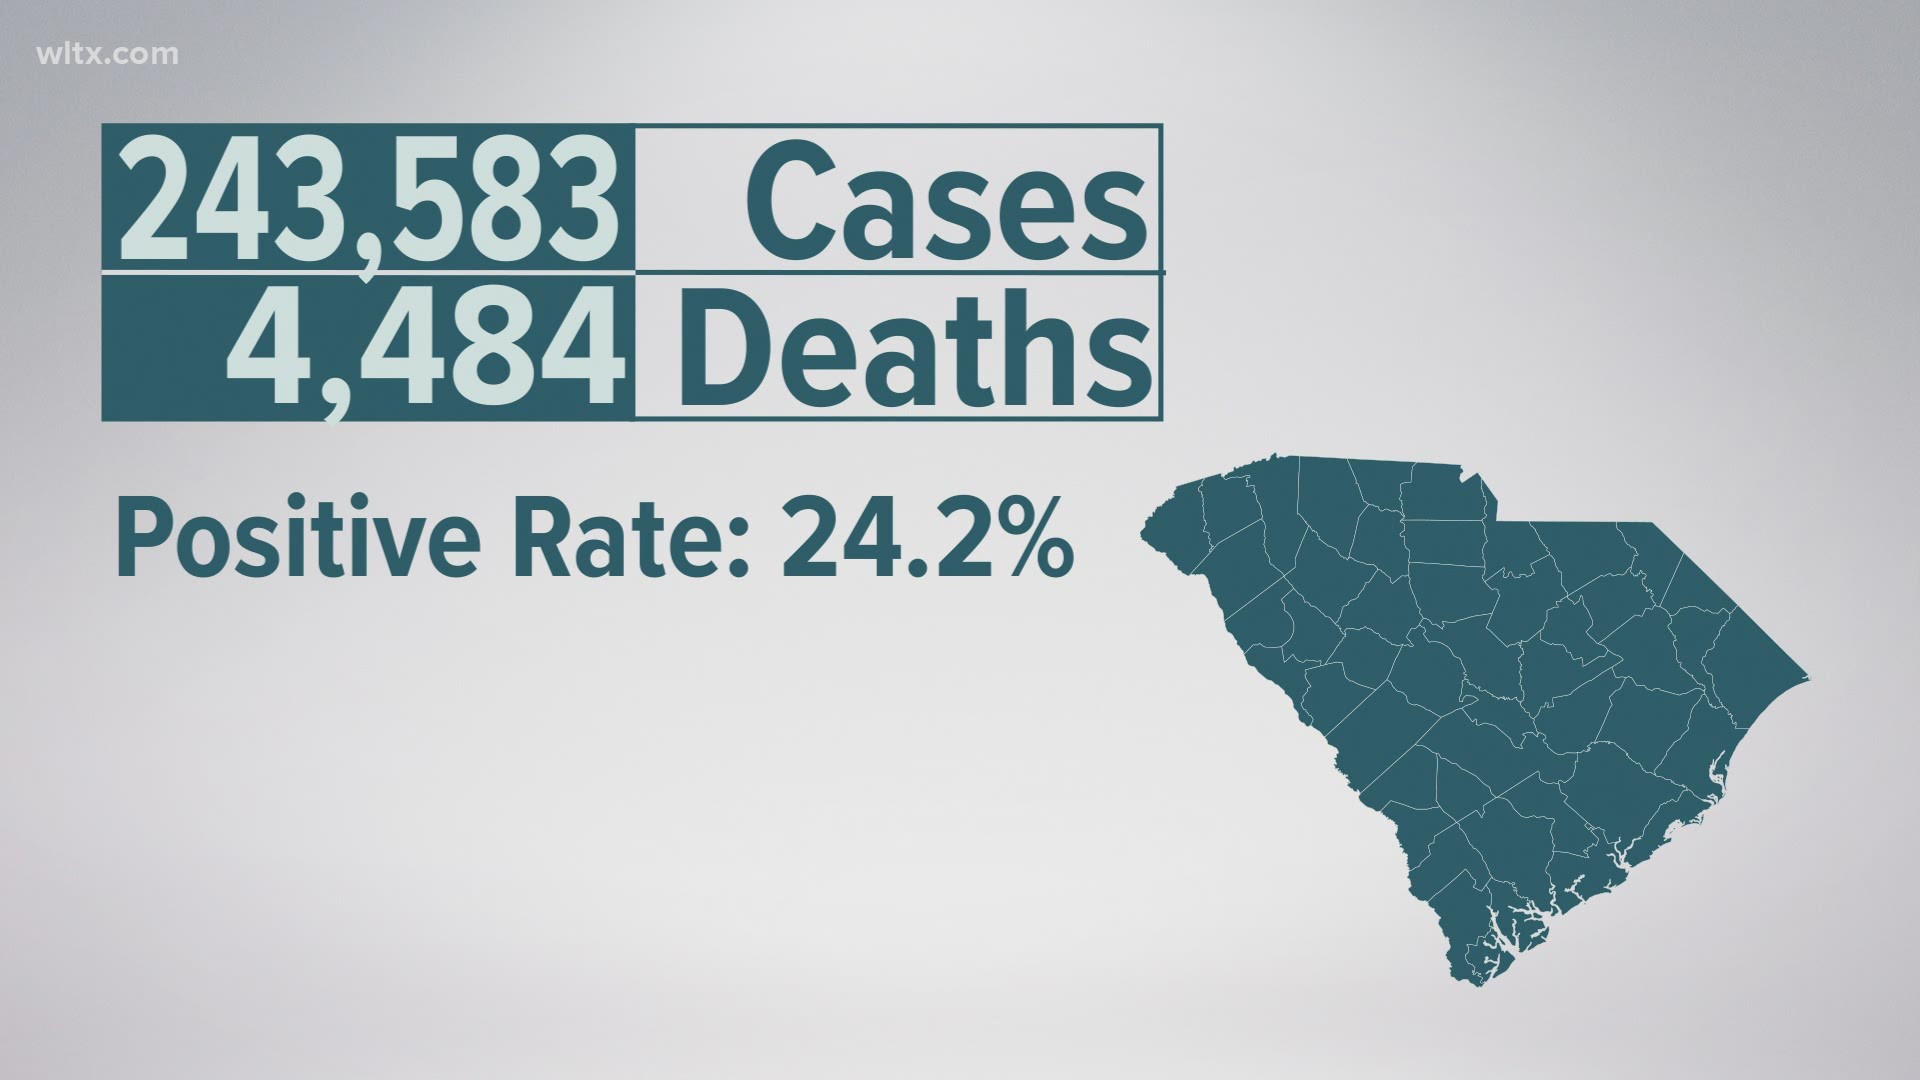 South Carolina percent positive: 24.2%, total confirmed cases of the coronavirus: 243,583, total number of confirmed deaths: 4,484